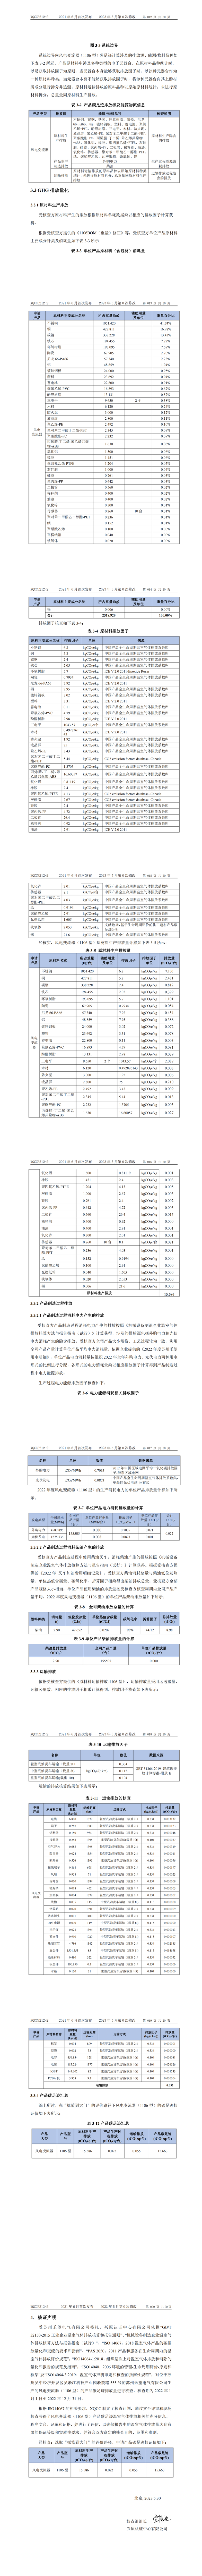 C G C 6 碳足迹报告-ISO14067、PAS2050-正规beat365旧版绿色_01.png